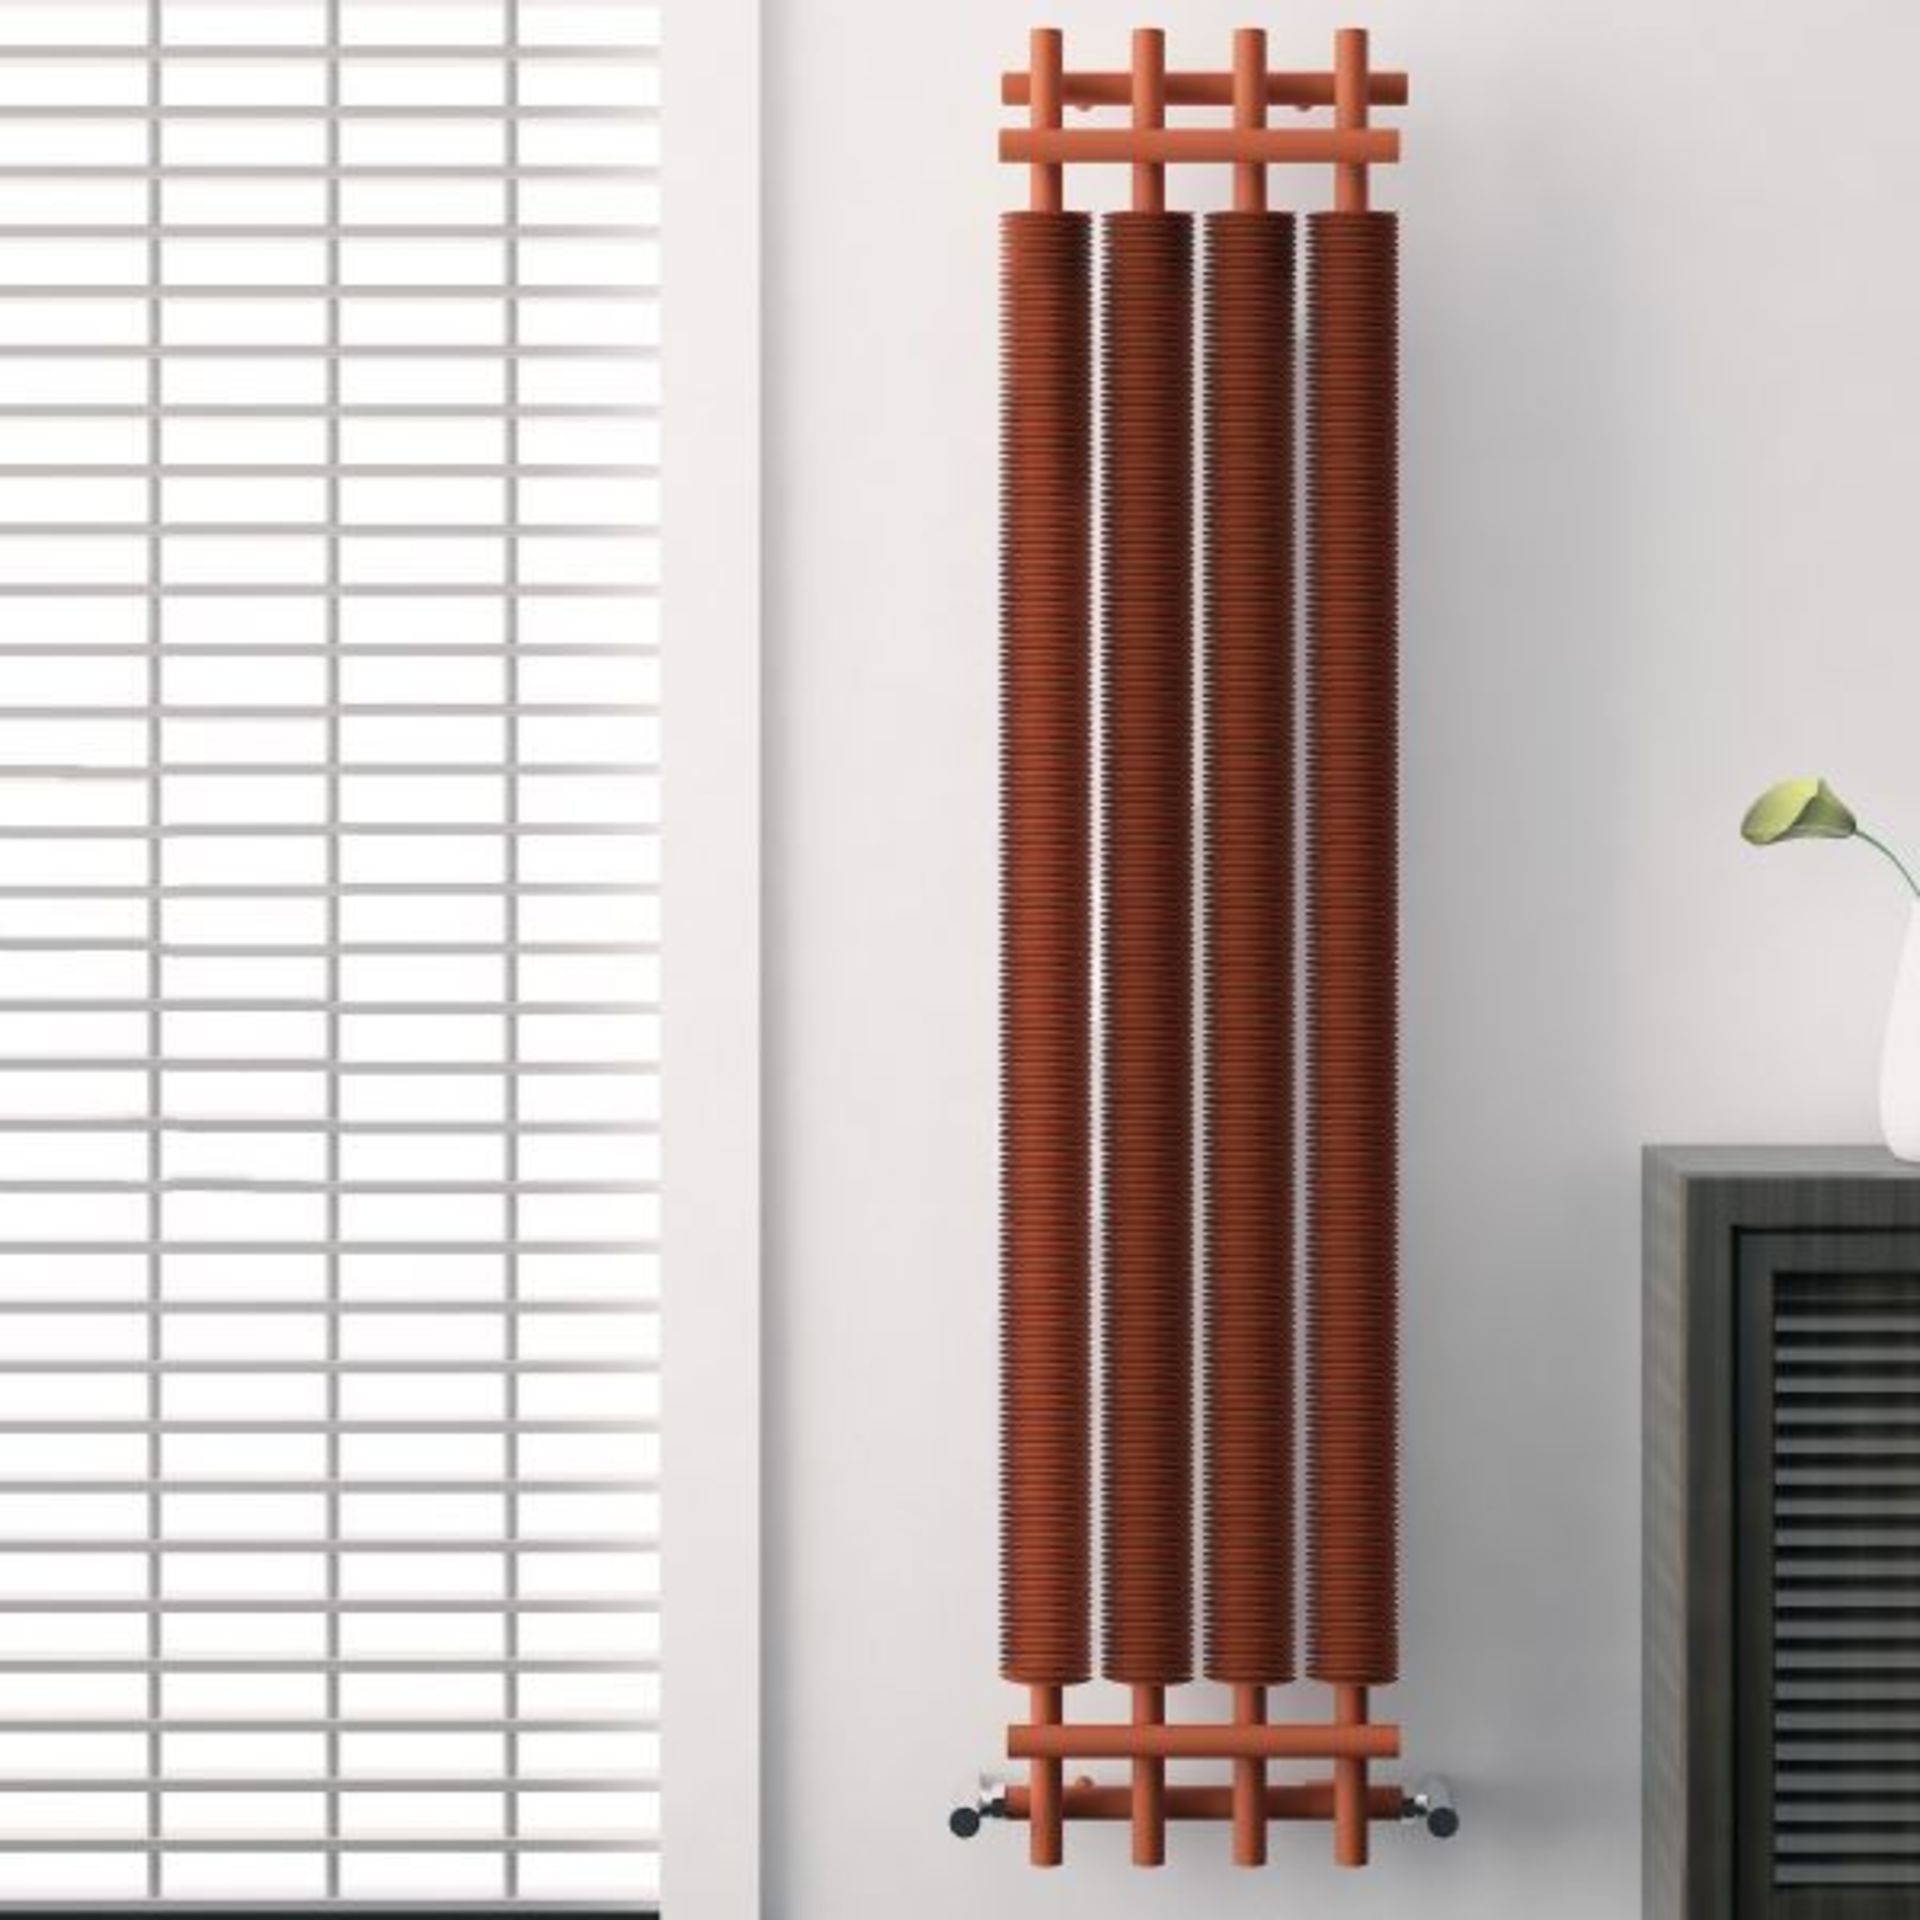 Carisa Dora Matt copper steel Industrial style radiator, 1800x490mm, comes with wall brackets, has a